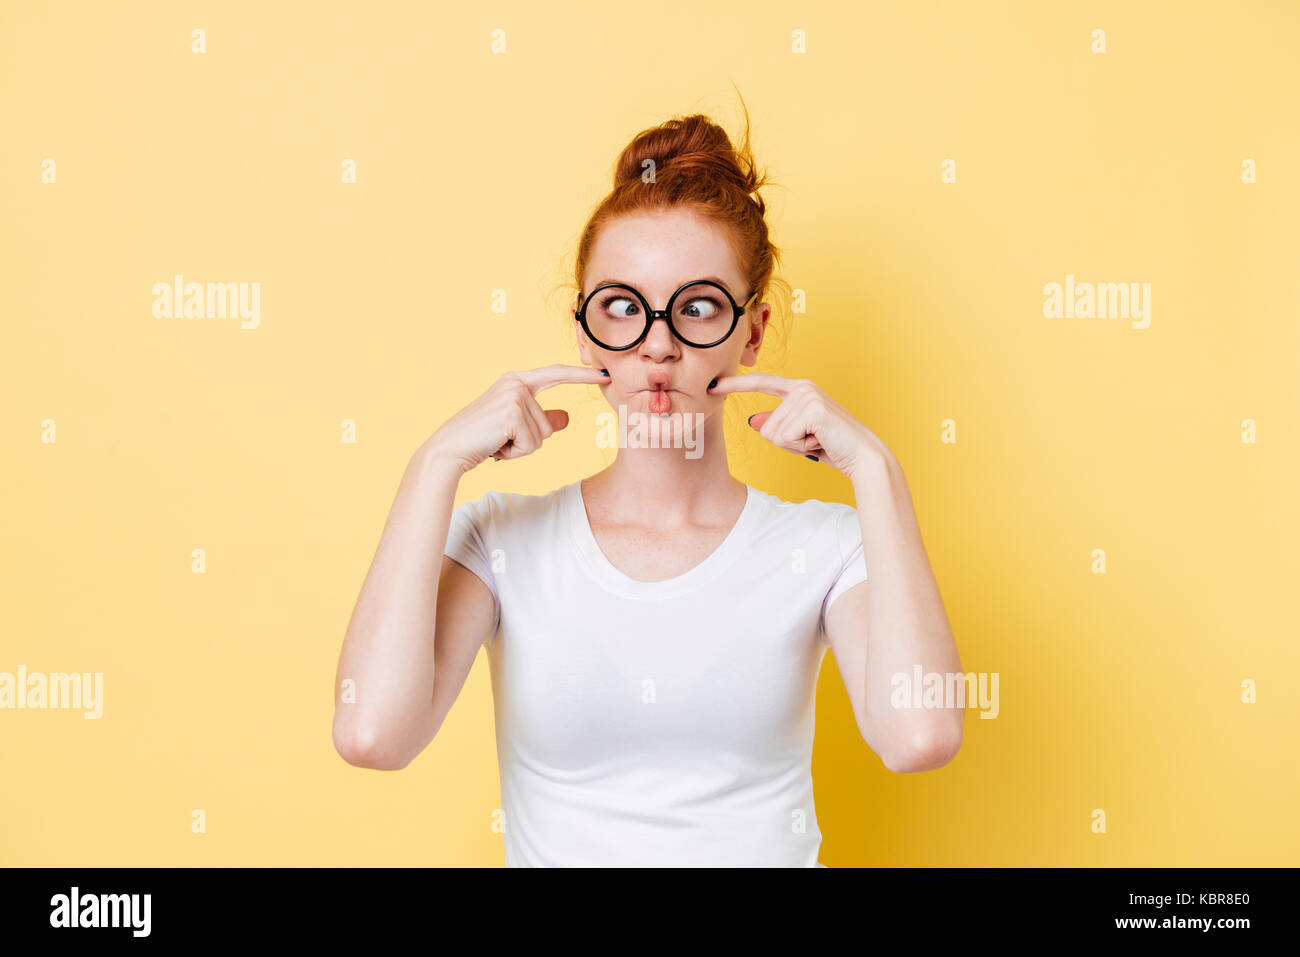 Funny ginger woman in eyeglasses puffed-off cheeks over yellow background Stock Photo